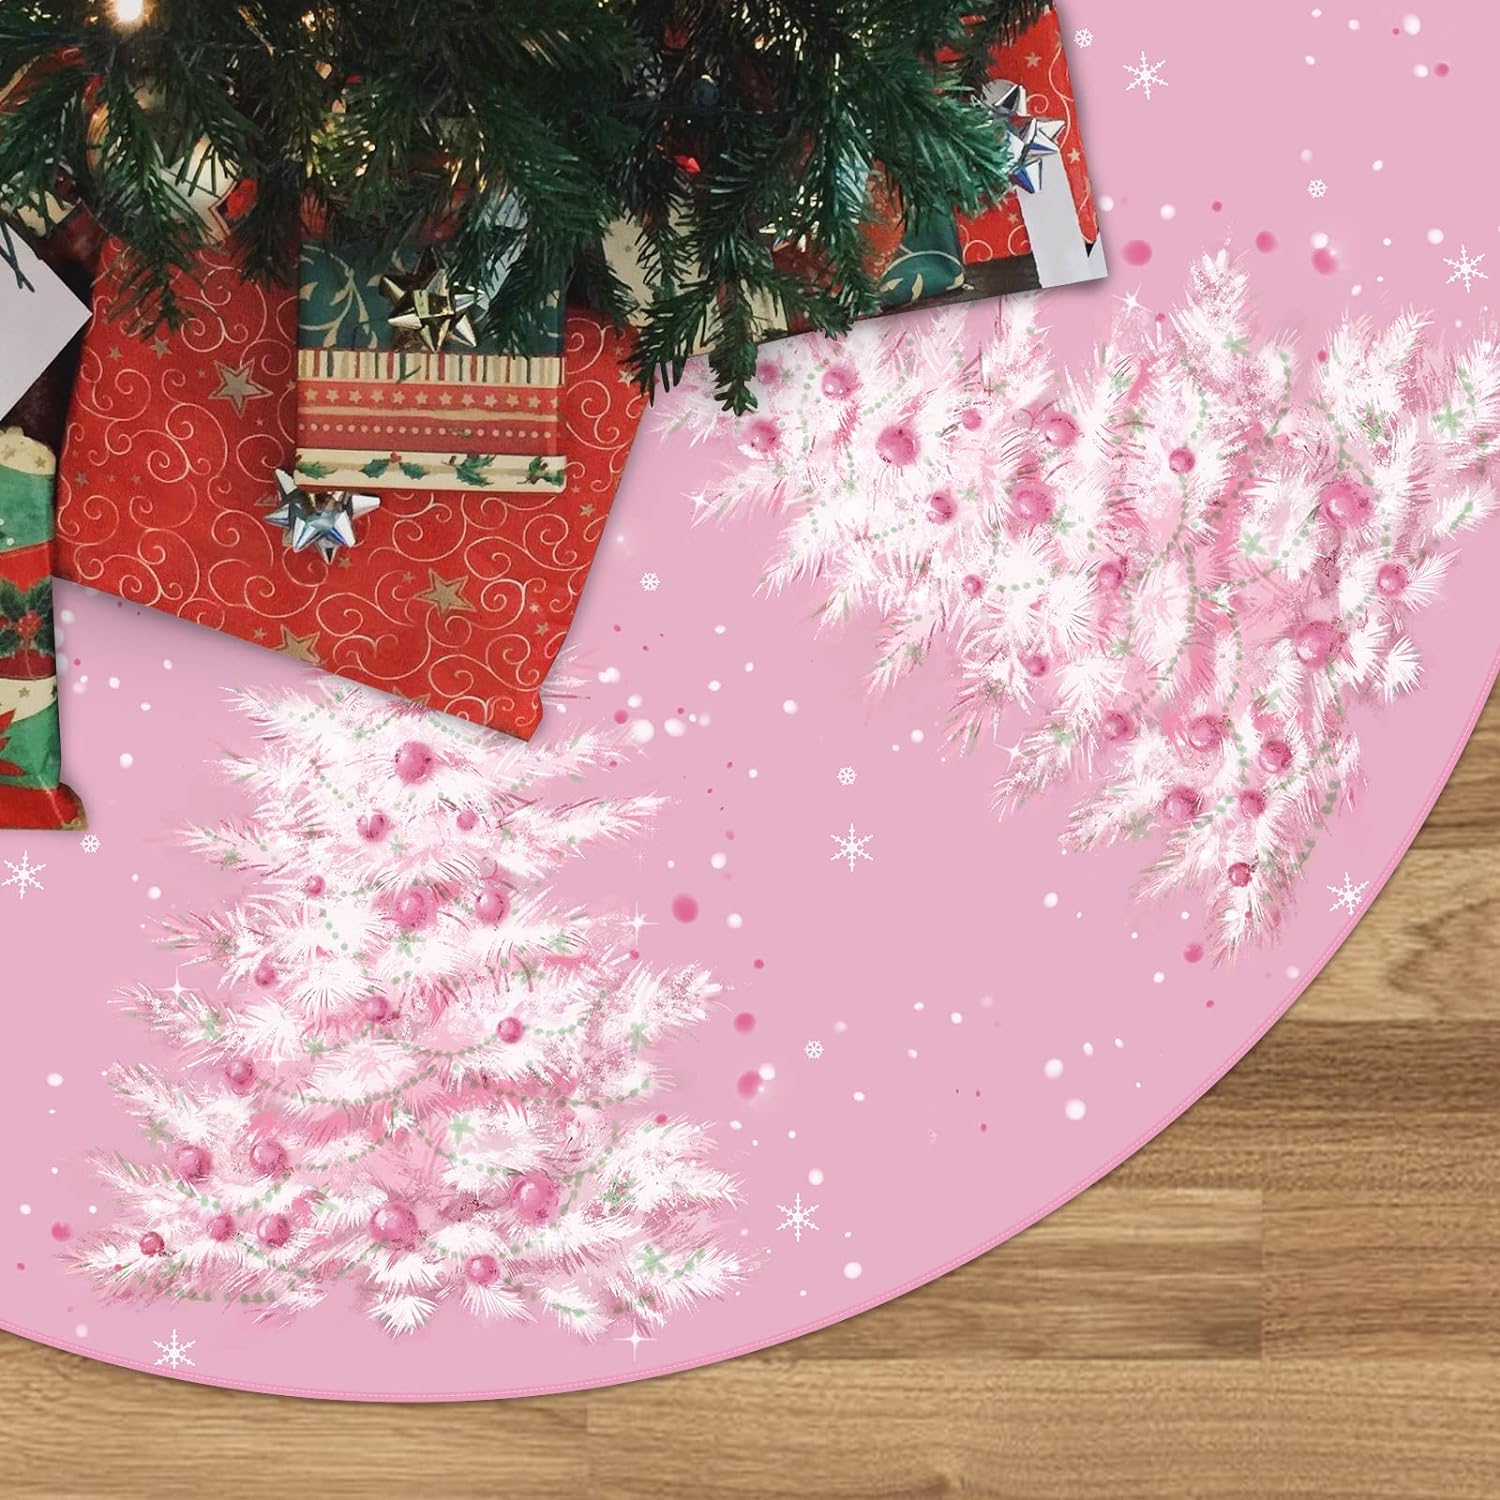 Great Choice Products Christmas Tree Skirt Pink Christmas Tree Skirt 48Inch Xmas Winter Tree Skirt For Christmas Indoor Outdoor Decorations